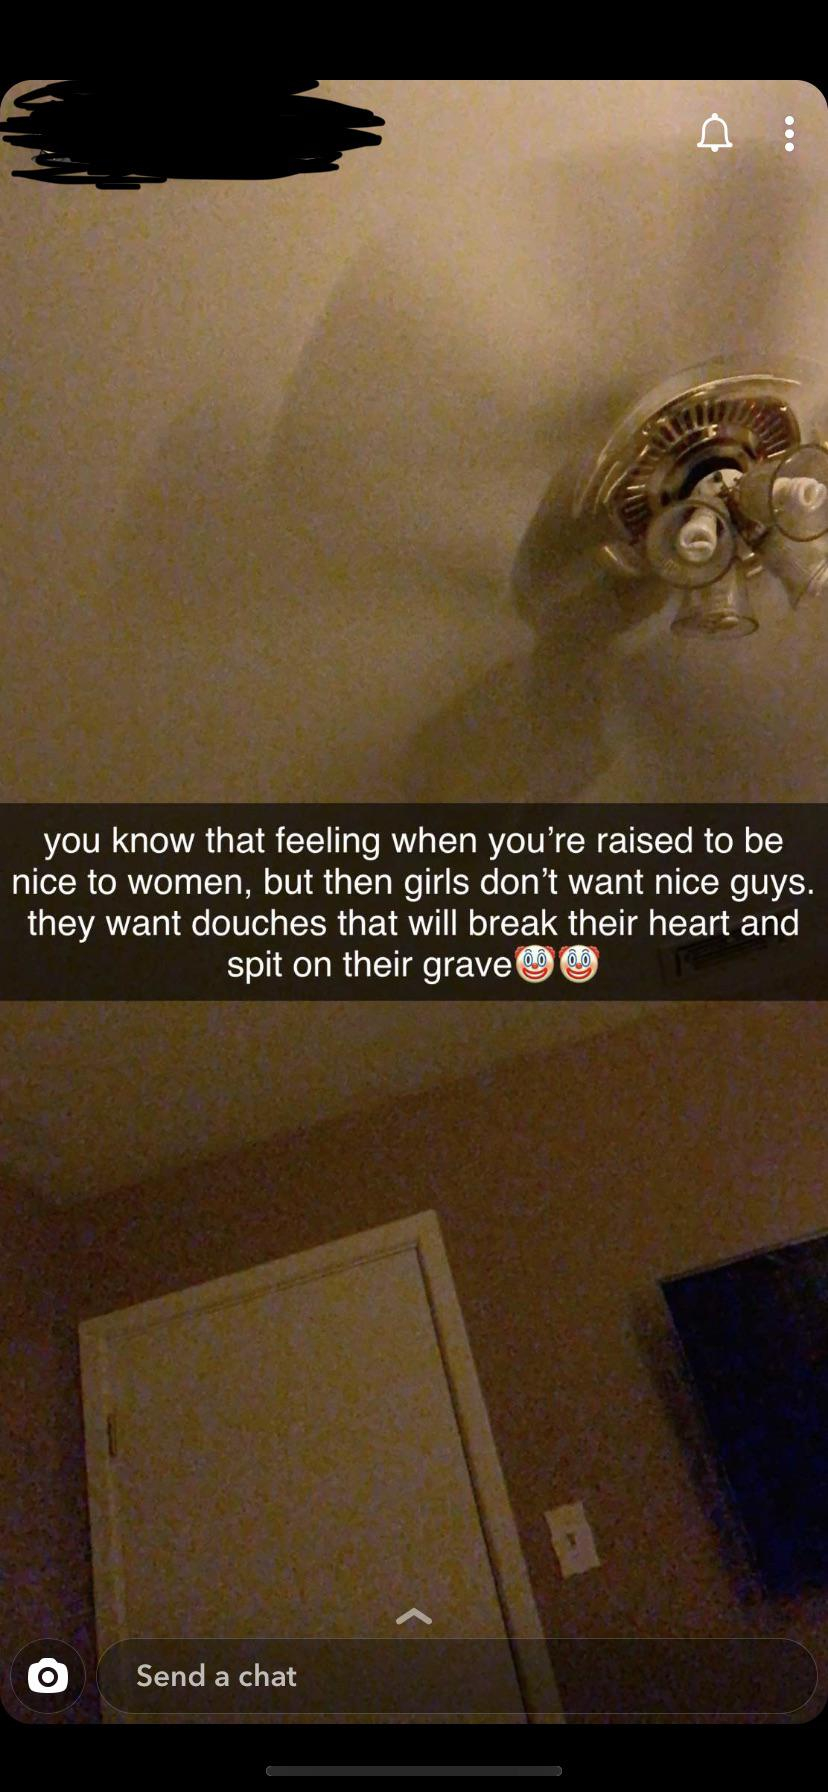 screenshot - you know that feeling when youre raised to be nice to women, but then girls don't want nice guys. they want douches that will break their heart and spit on their grave Send a chat